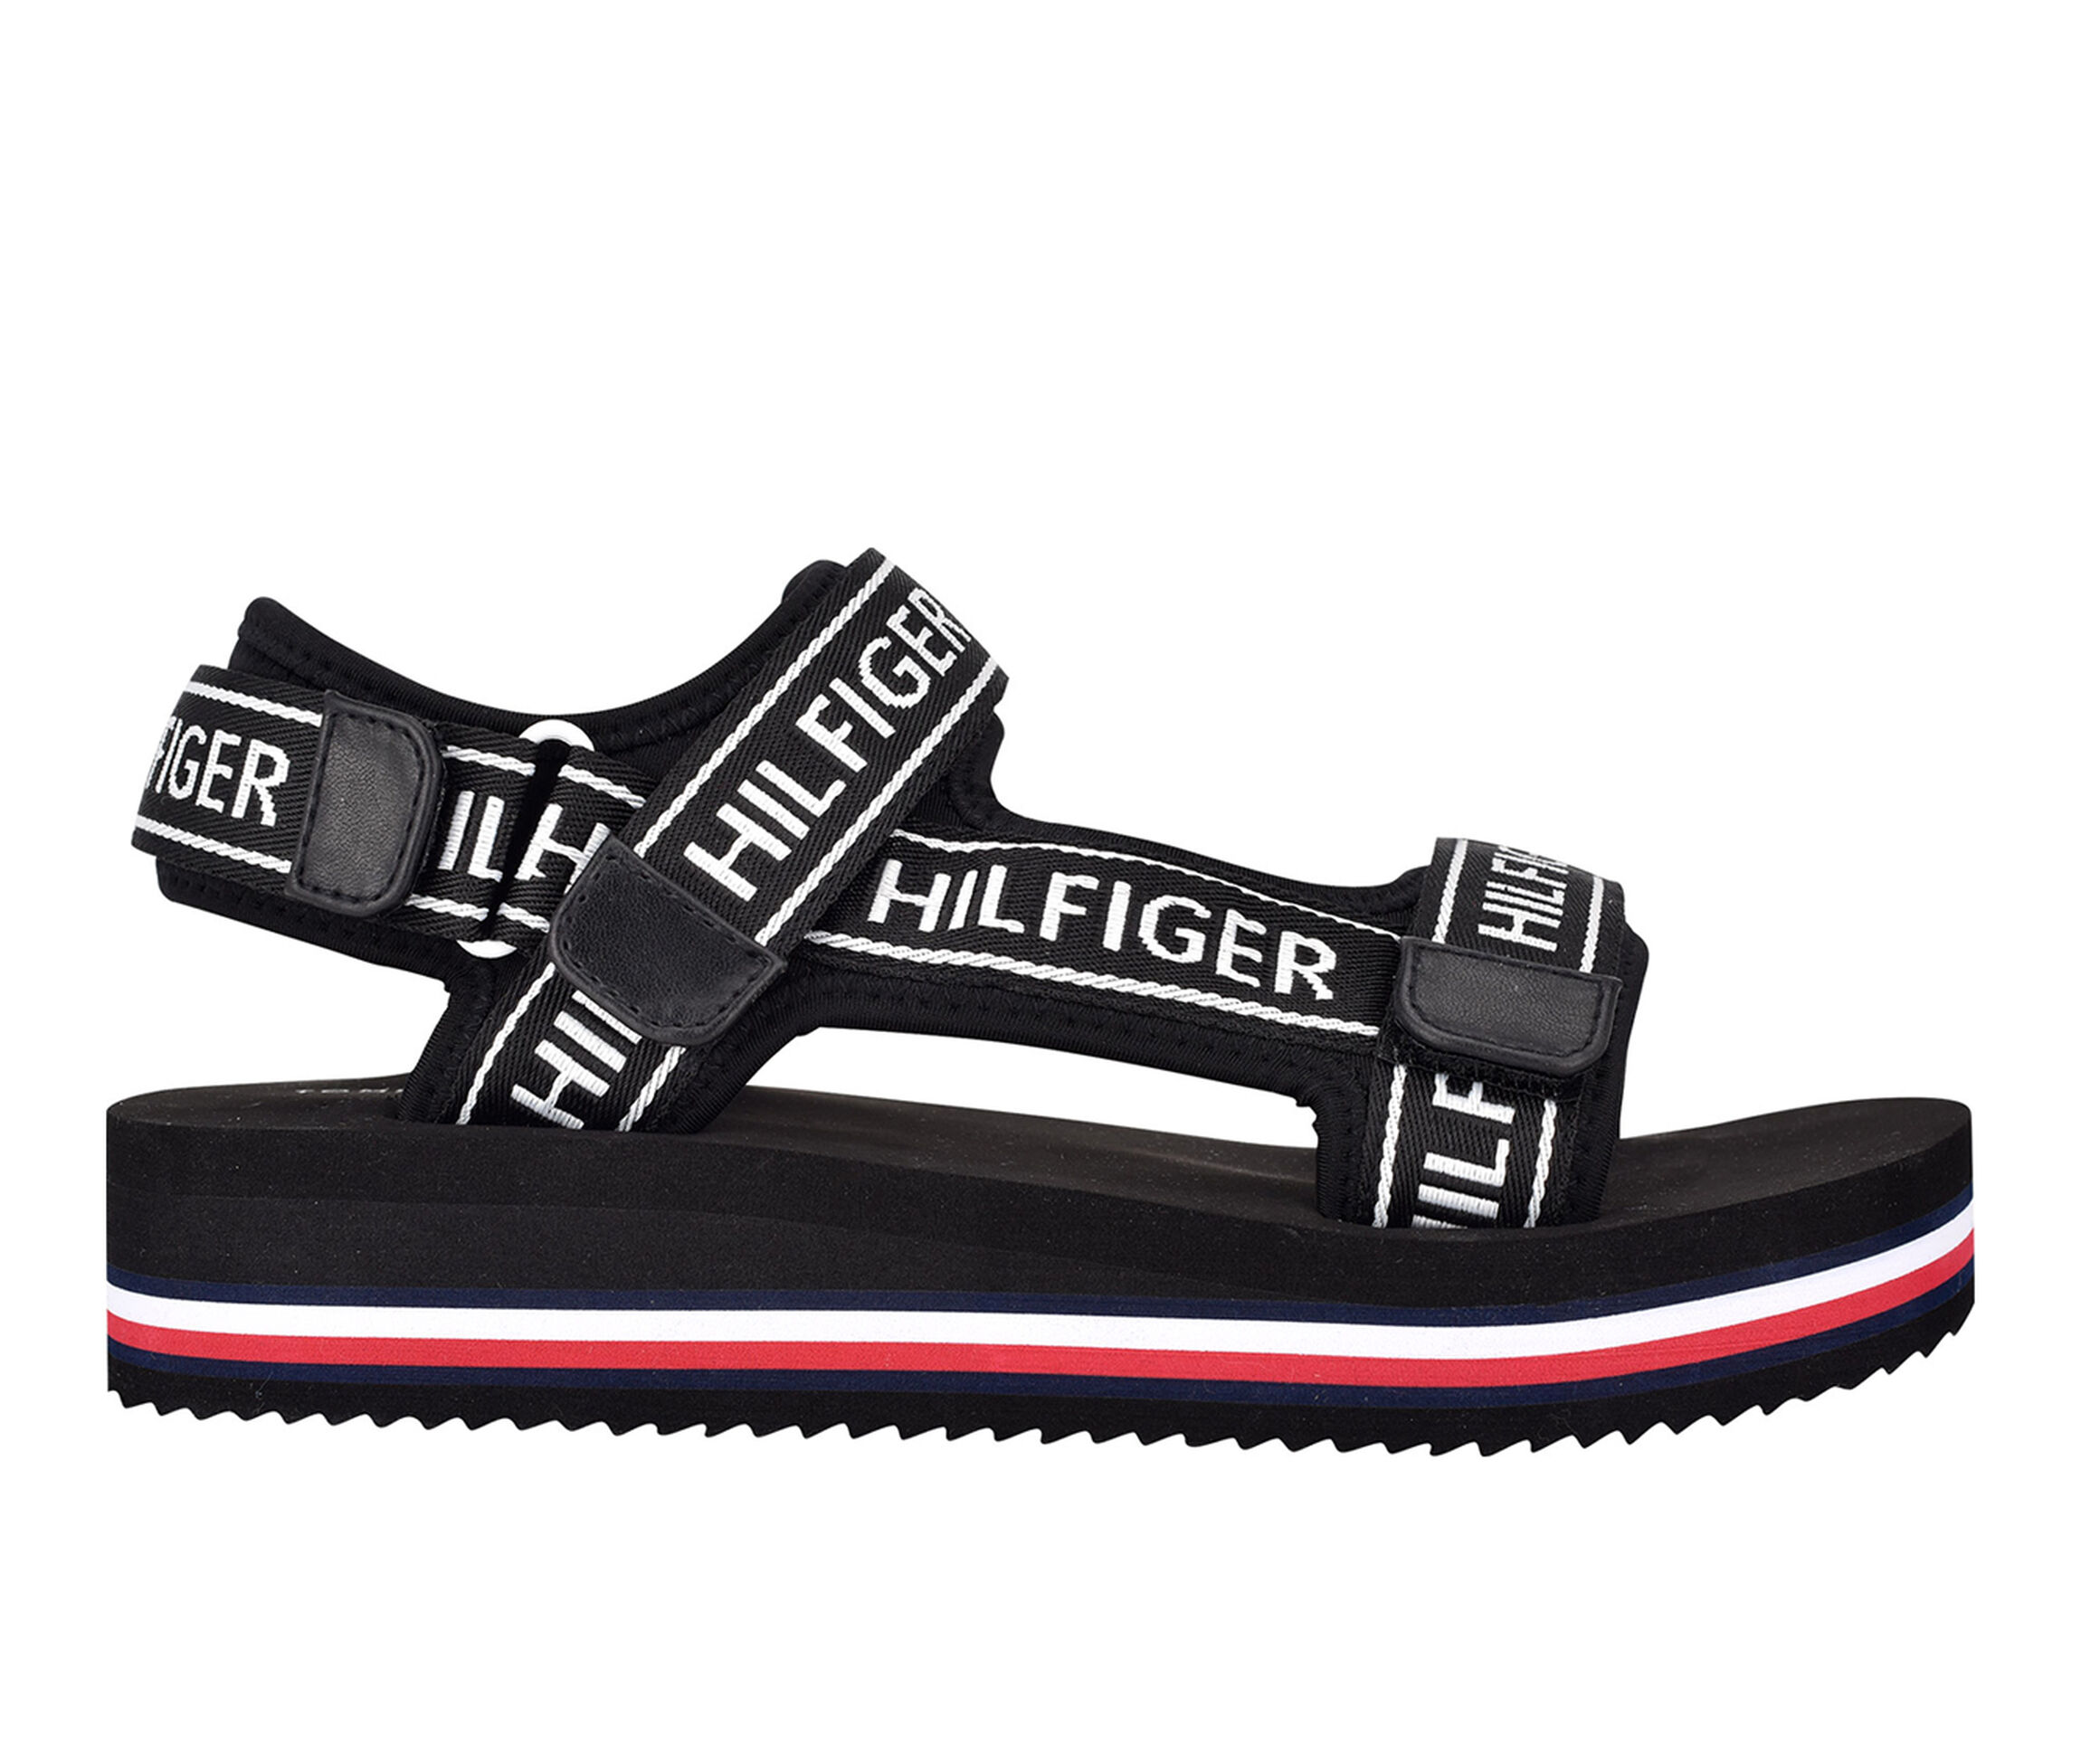 Best Selling Tommy Hilfiger Nurii Women's Sandal (Black - Size 5 - FABRIC)  | AccuWeather Shop